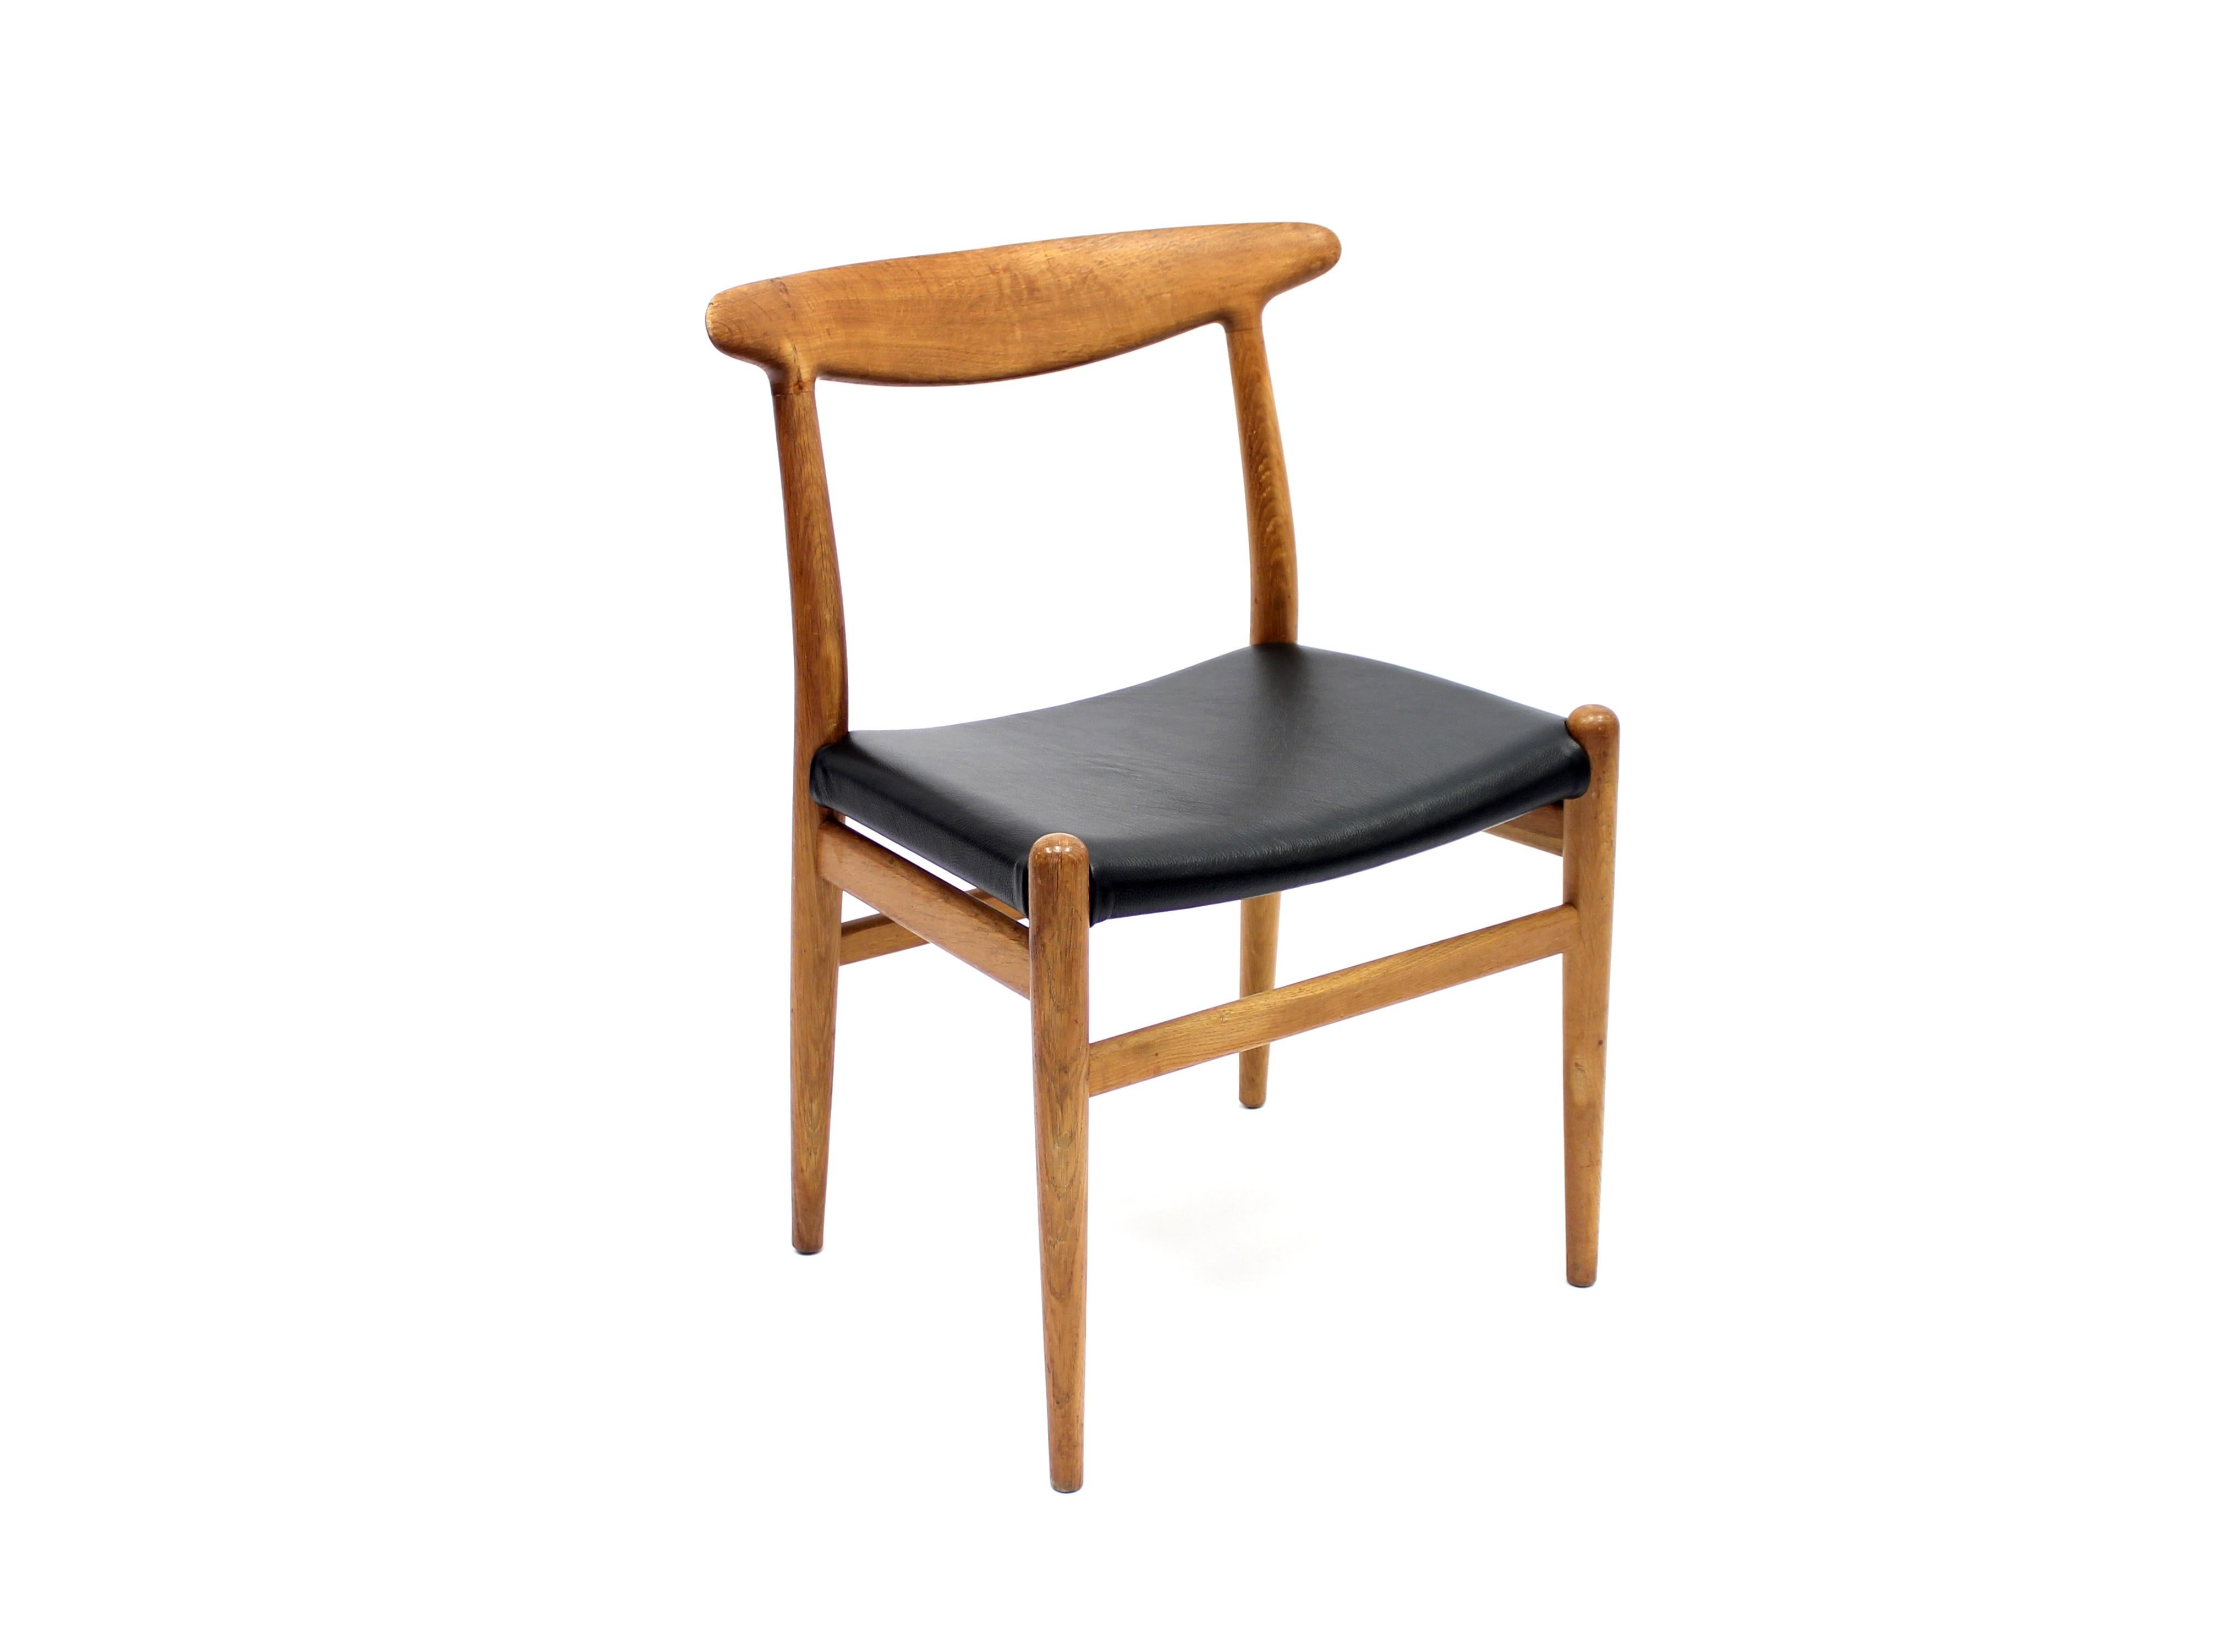 Chair, model W2, designed by Hans Wenger for C.M. Madsen. Frame in smoked oak with new black leather seat. Light ware and patina on wooden parts.